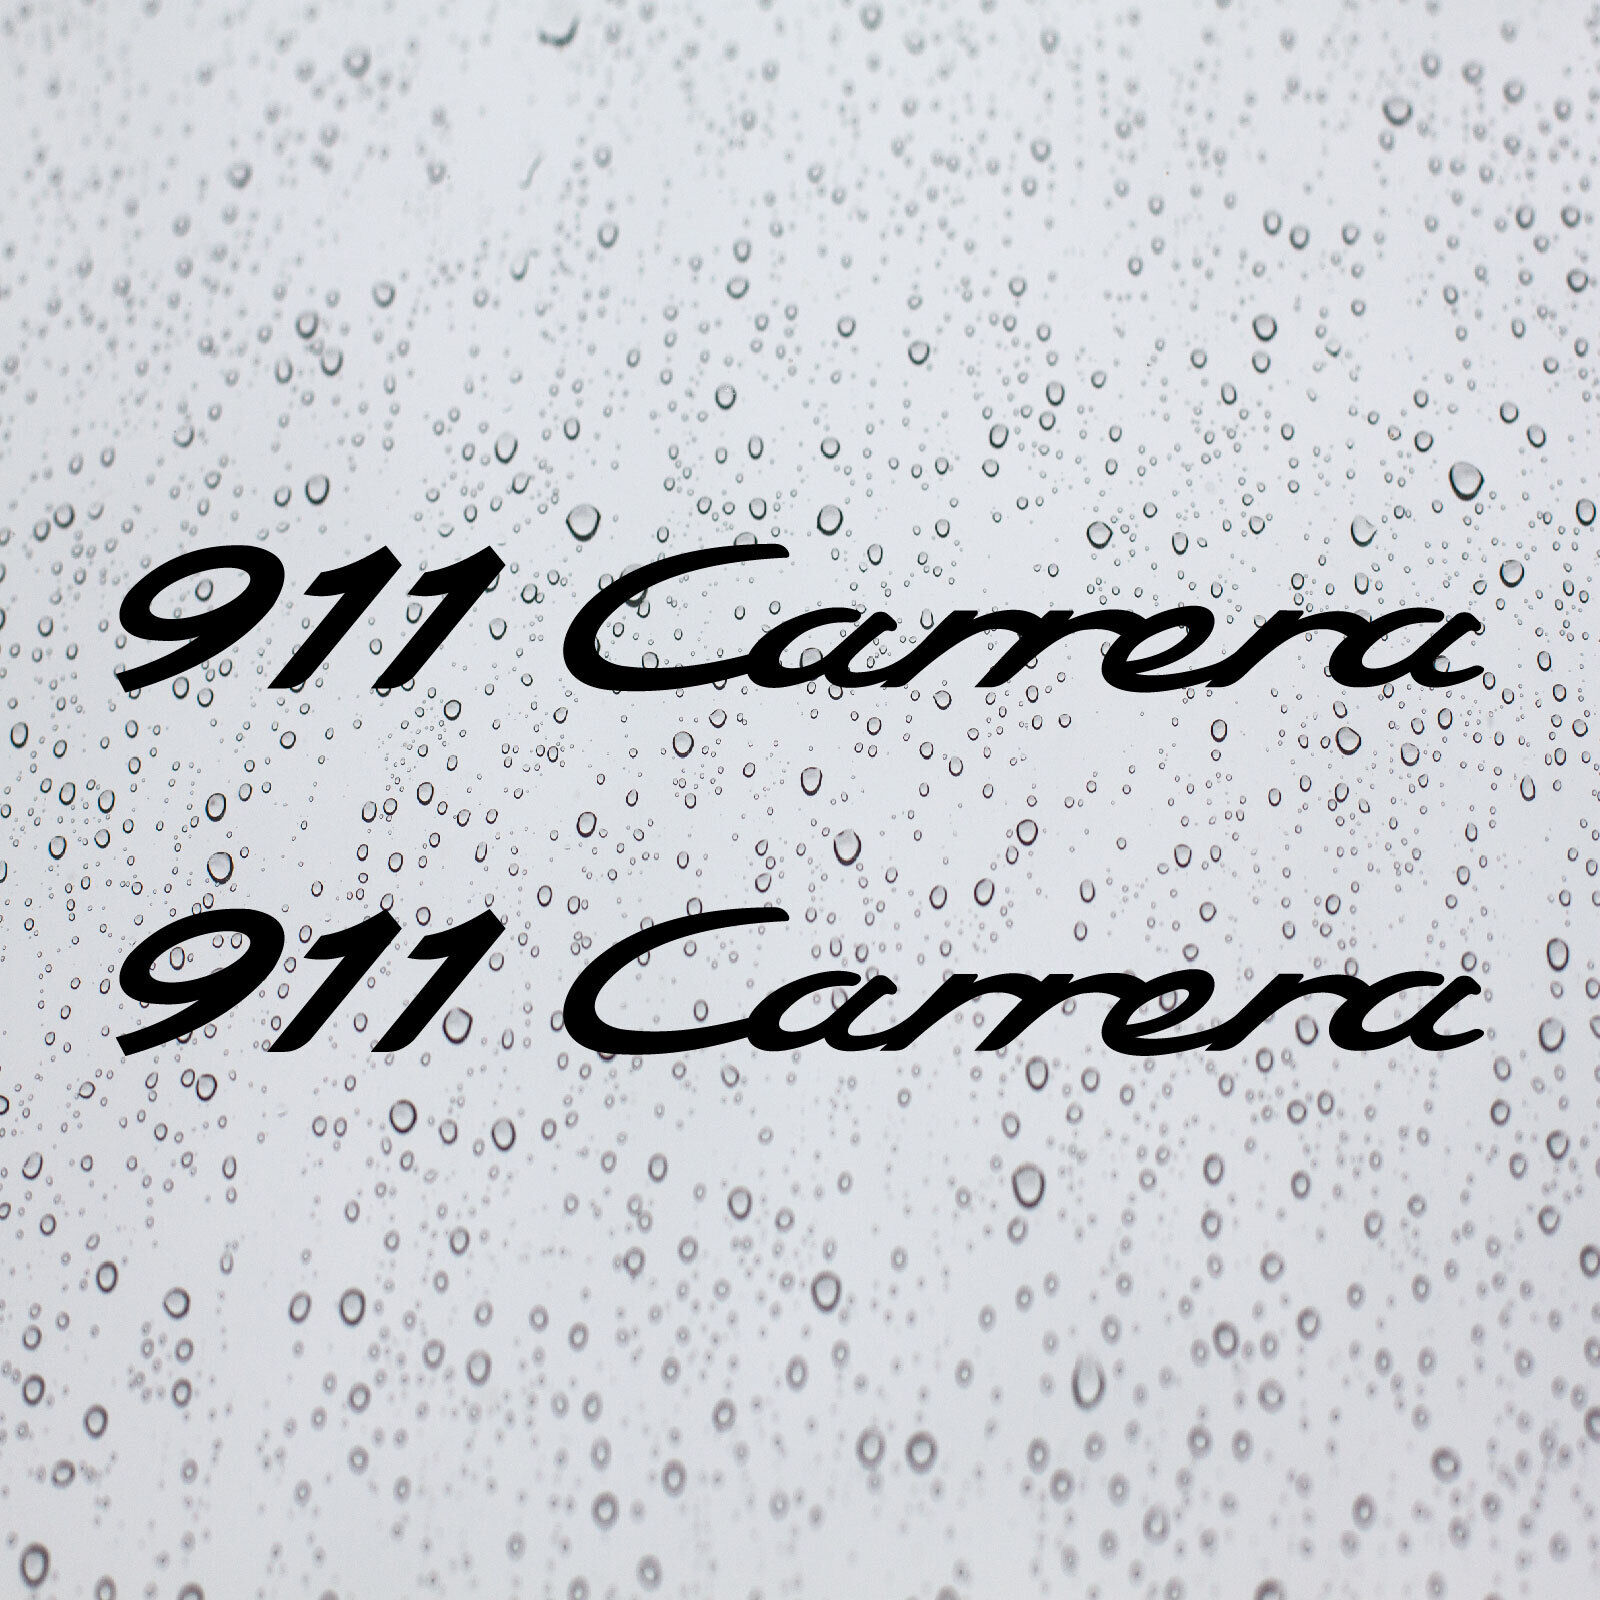 Pair 911 Carrera Side Decal Vinyl Stickers for Porsche Cars